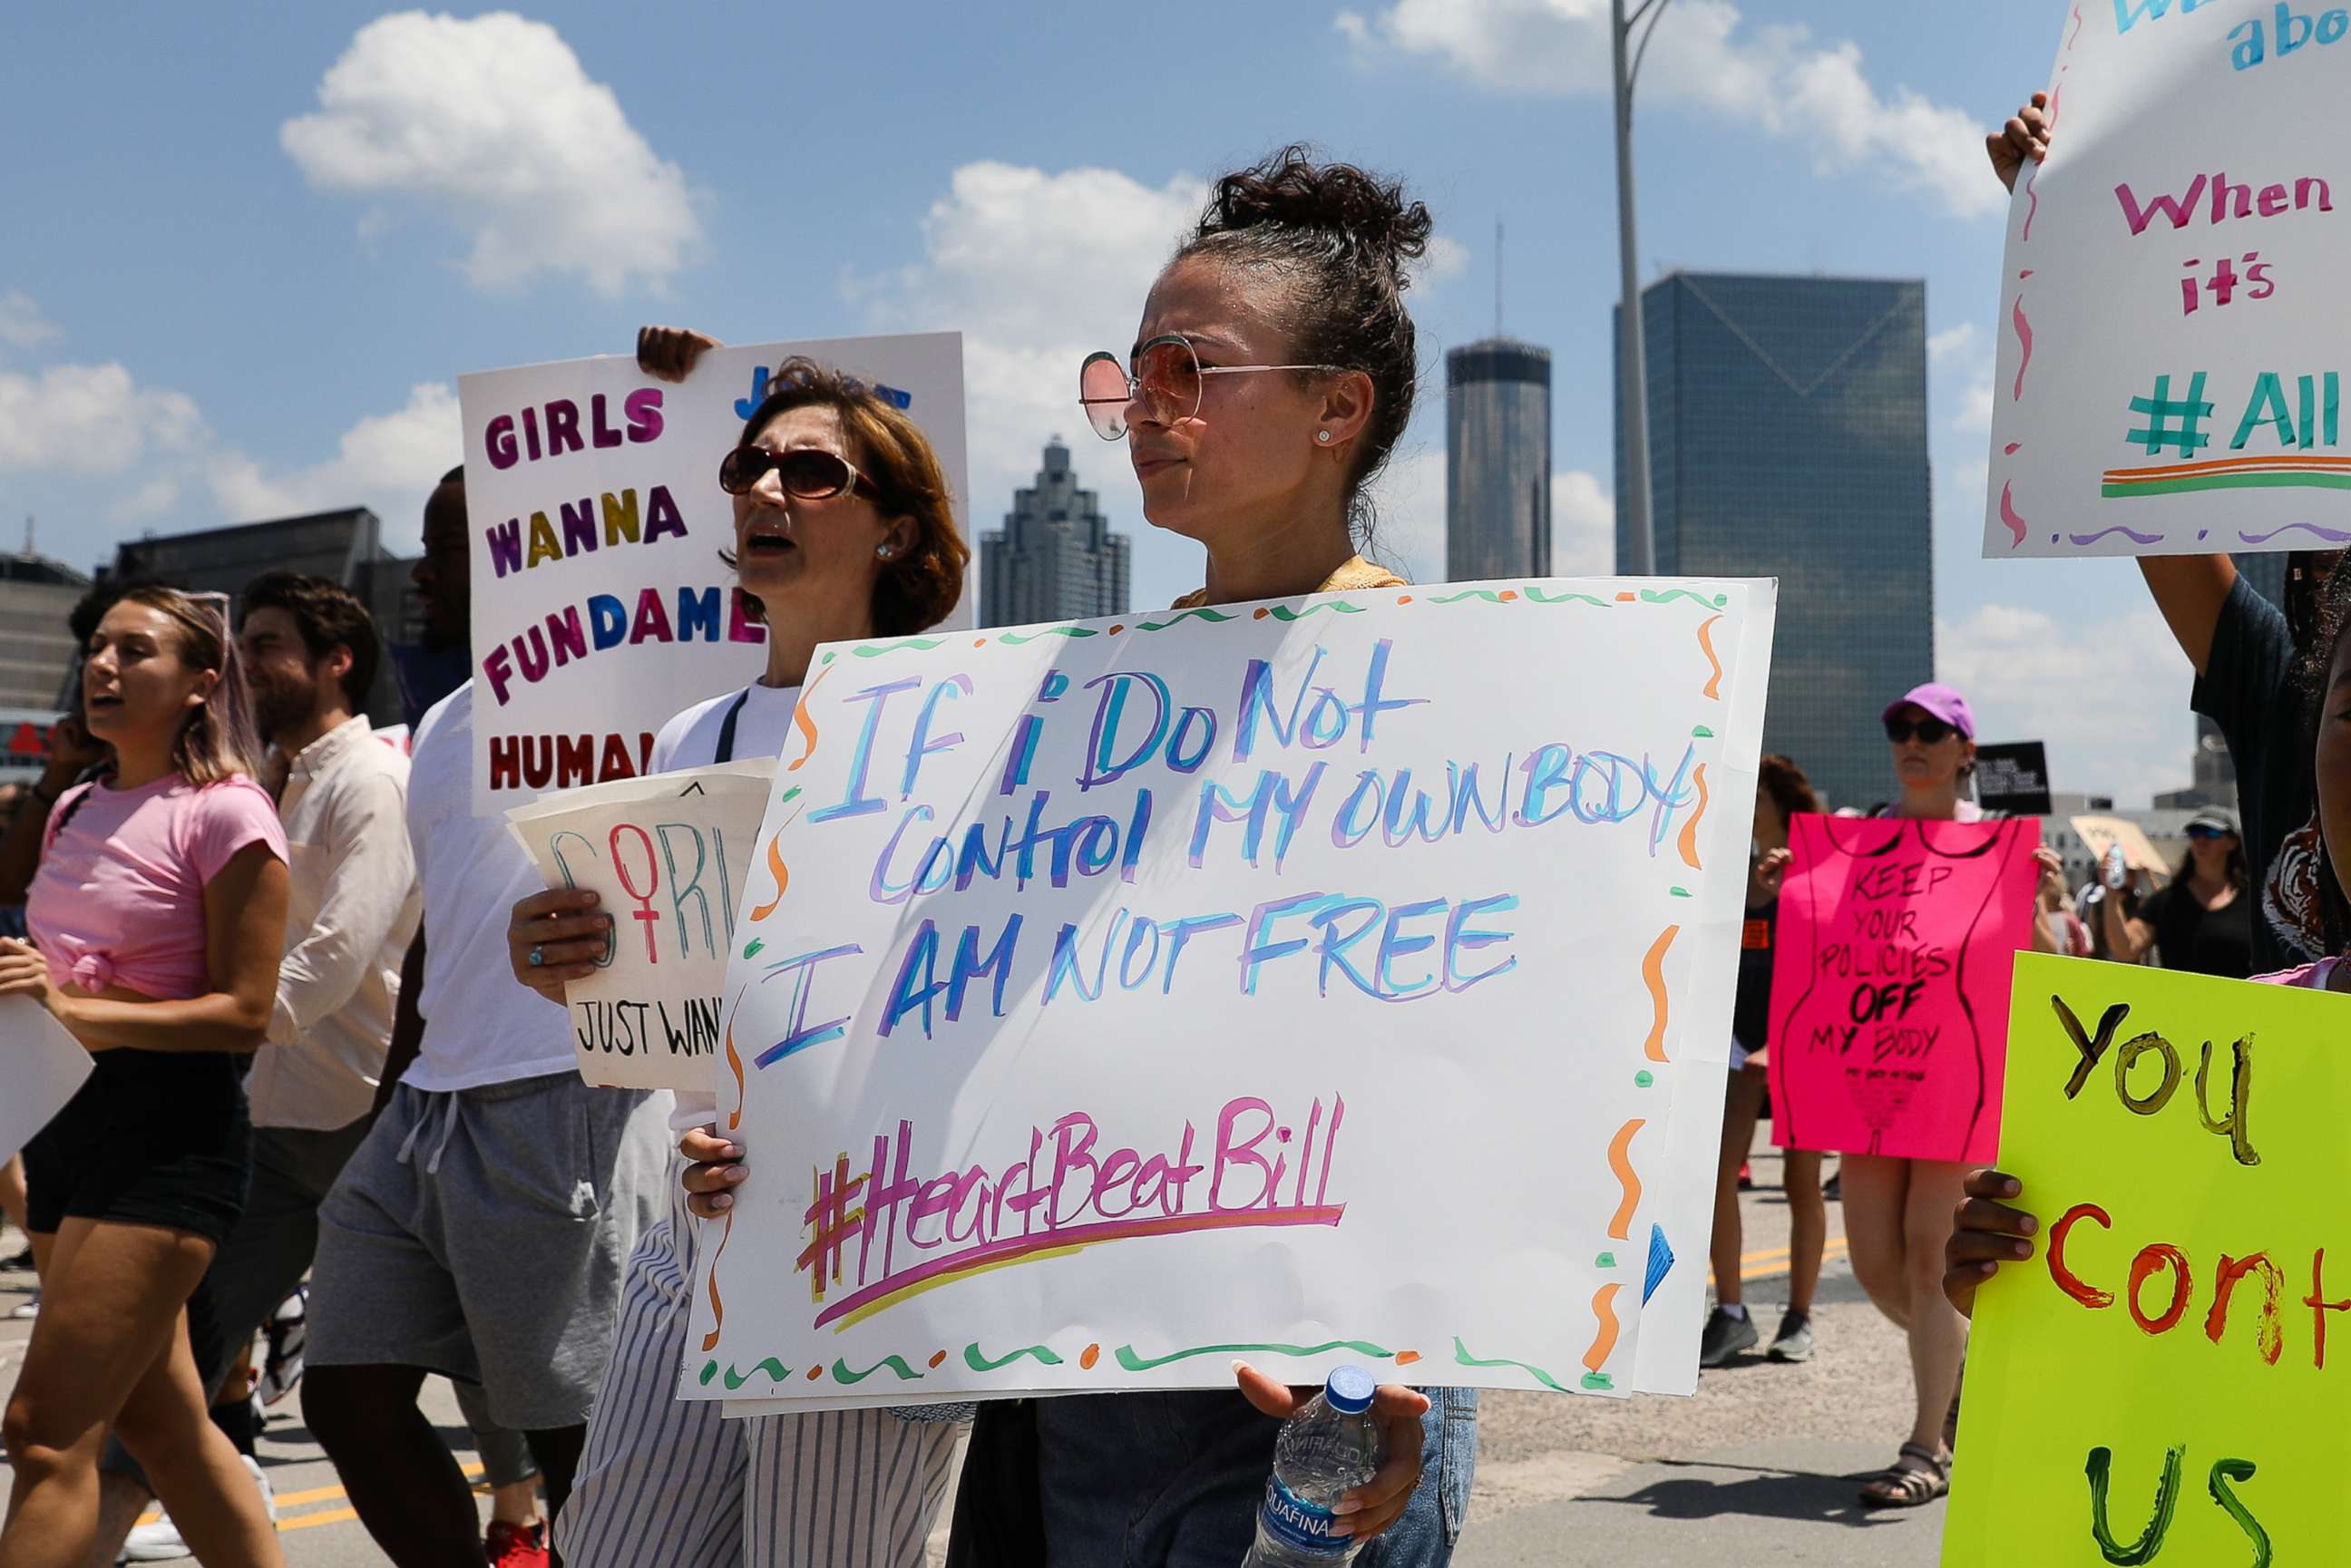 PHOTO: Demonstrators hold signs while marching during a protest against Georgia's 'heartbeat' abortion bill in Atlanta, Georgia, May 25, 2019. The bill bans abortion after a doctor can detect a fetal heartbeat, usually around the sixth week of pregnancy.